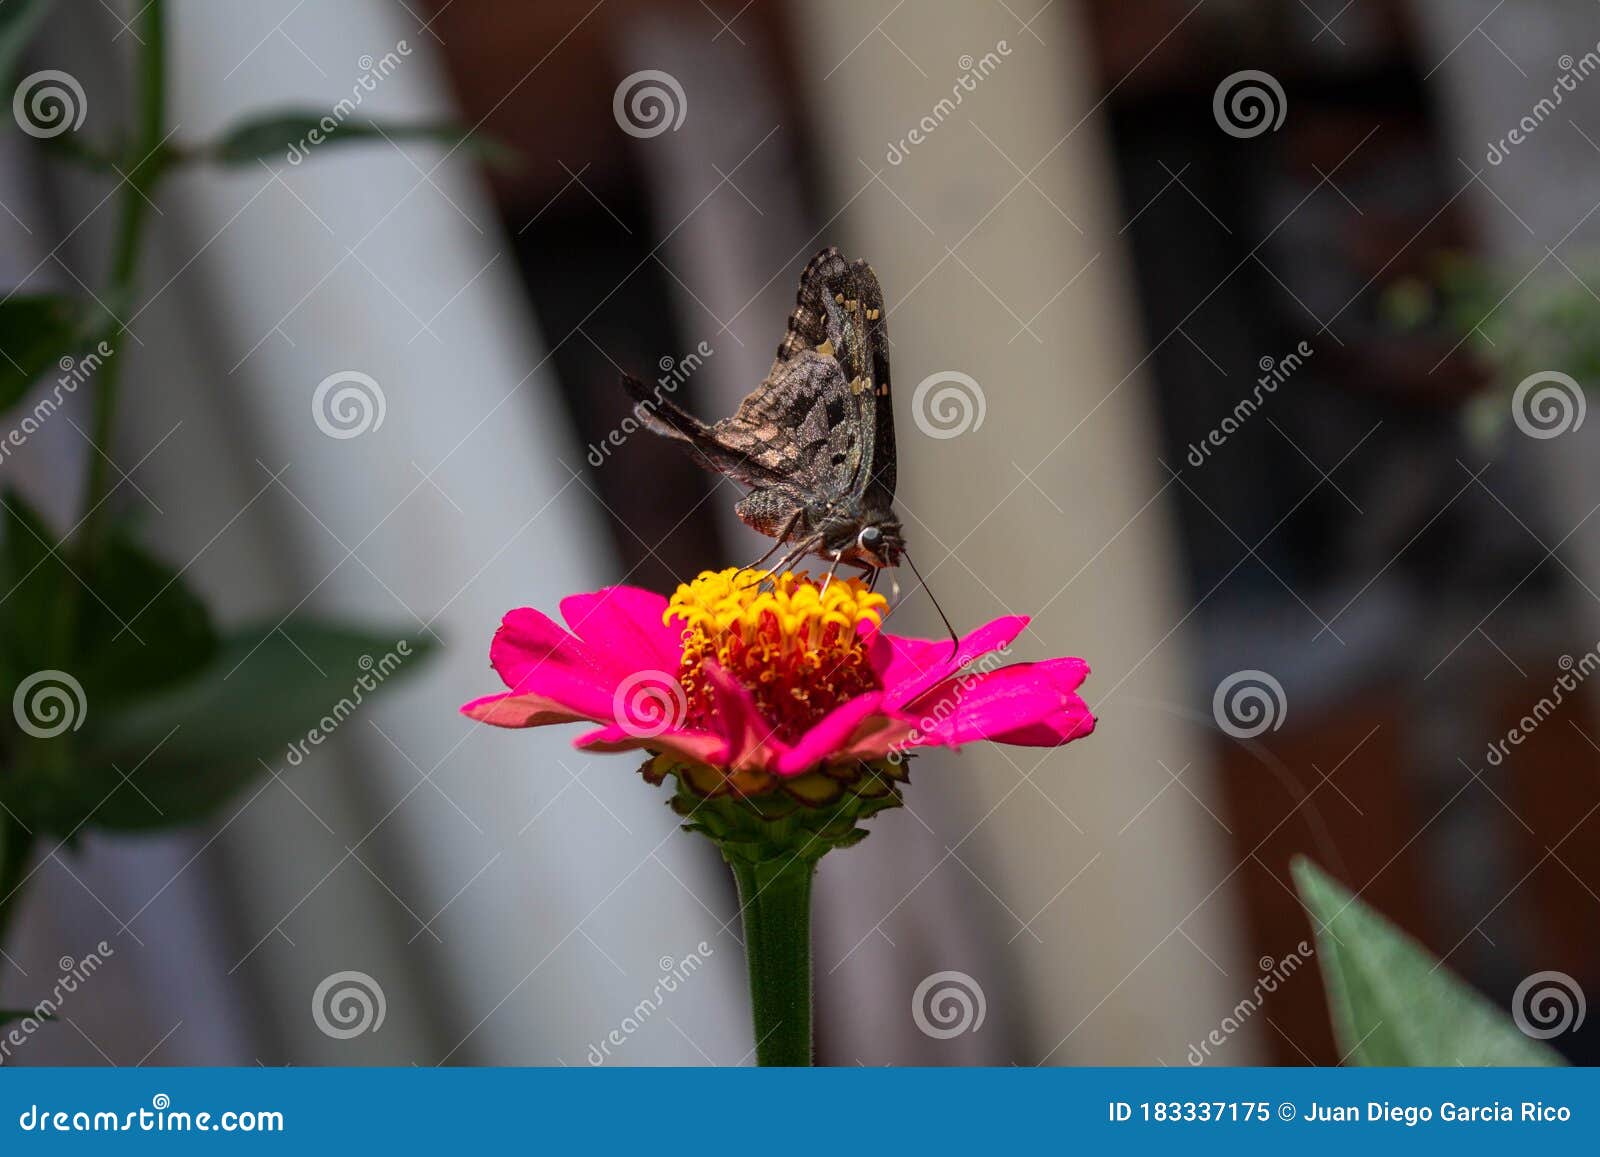 brown butterfly in front position drinking nectar from the flower zapato de obispo